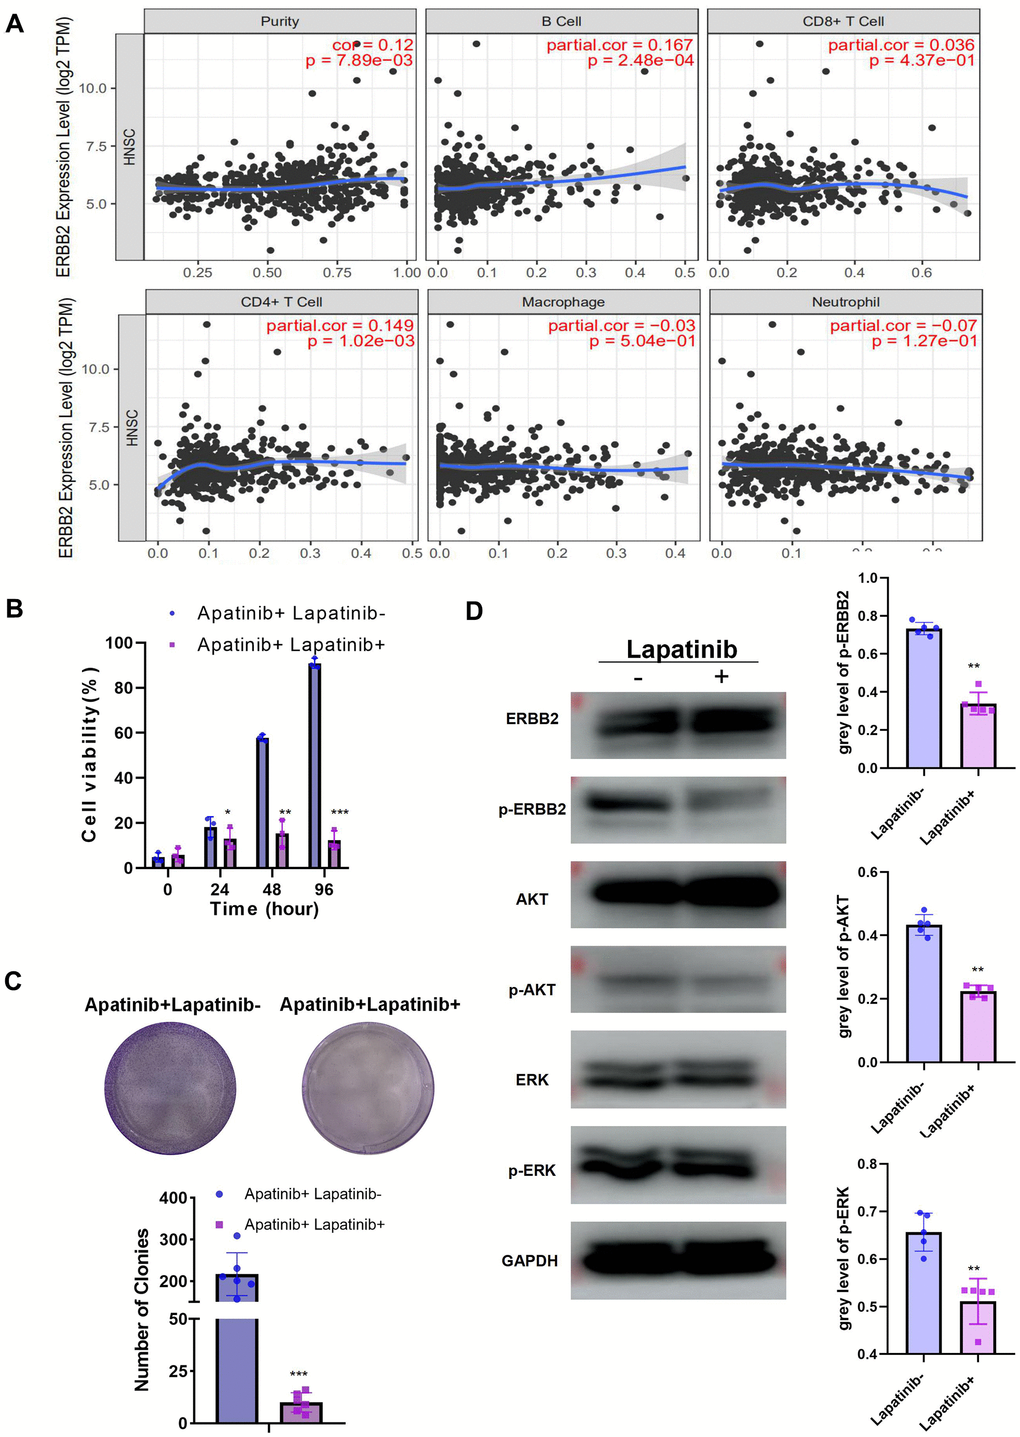 The combination of lapatinib and apatinib re-sensitizes AR cells to apatinib (A) The negative correlation between ERBB2 and TILs was confirmed using TIMER 2.0. (B) Cell viability after apatinib (20 μM) treatment, with or without lapatinib (20 μM), for different times, as assessed using an MTT assay. The combination of lapatinib and apatinib re-sensitized AR cells to apatinib. (C) Colony formation was inhibited in the combination group compared with that in the groups treated with each drug alone. (D) Western blotting illustrating the abundance of related signaling pathway proteins after apatinib (20 μM) treatment, with or without lapatinib(20 μM). Lapatinib treatment suppressed the levels of ERRB2, AKT and ERK phosphorylation. *P 